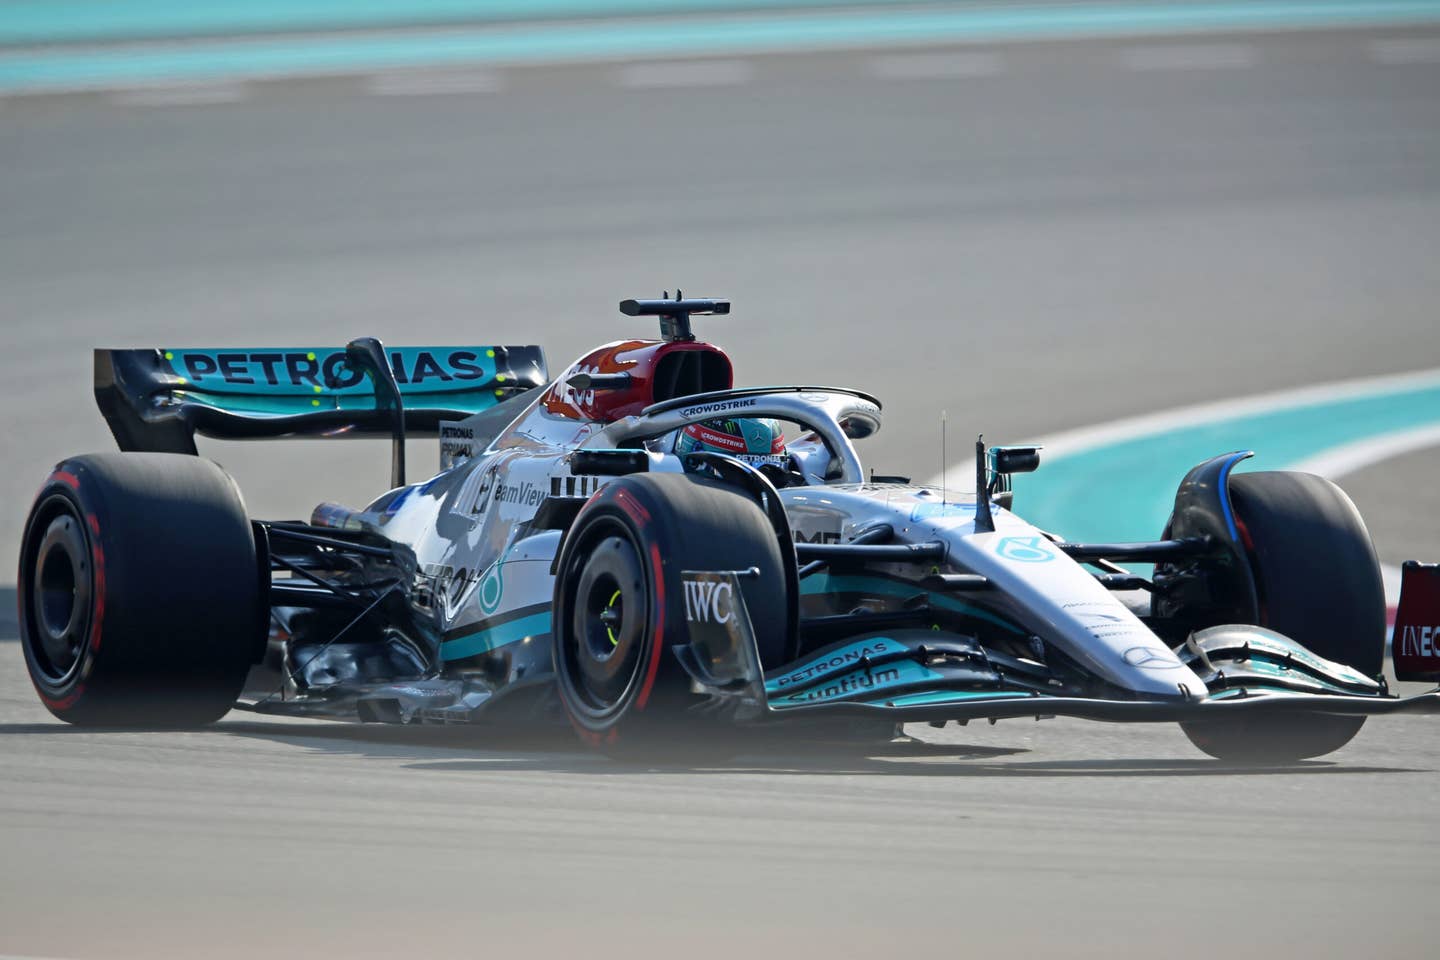 The Mercedes W13 lacked performance in the first half of 2022, though significantly improved towards the end of the season. <em>Getty Images</em>